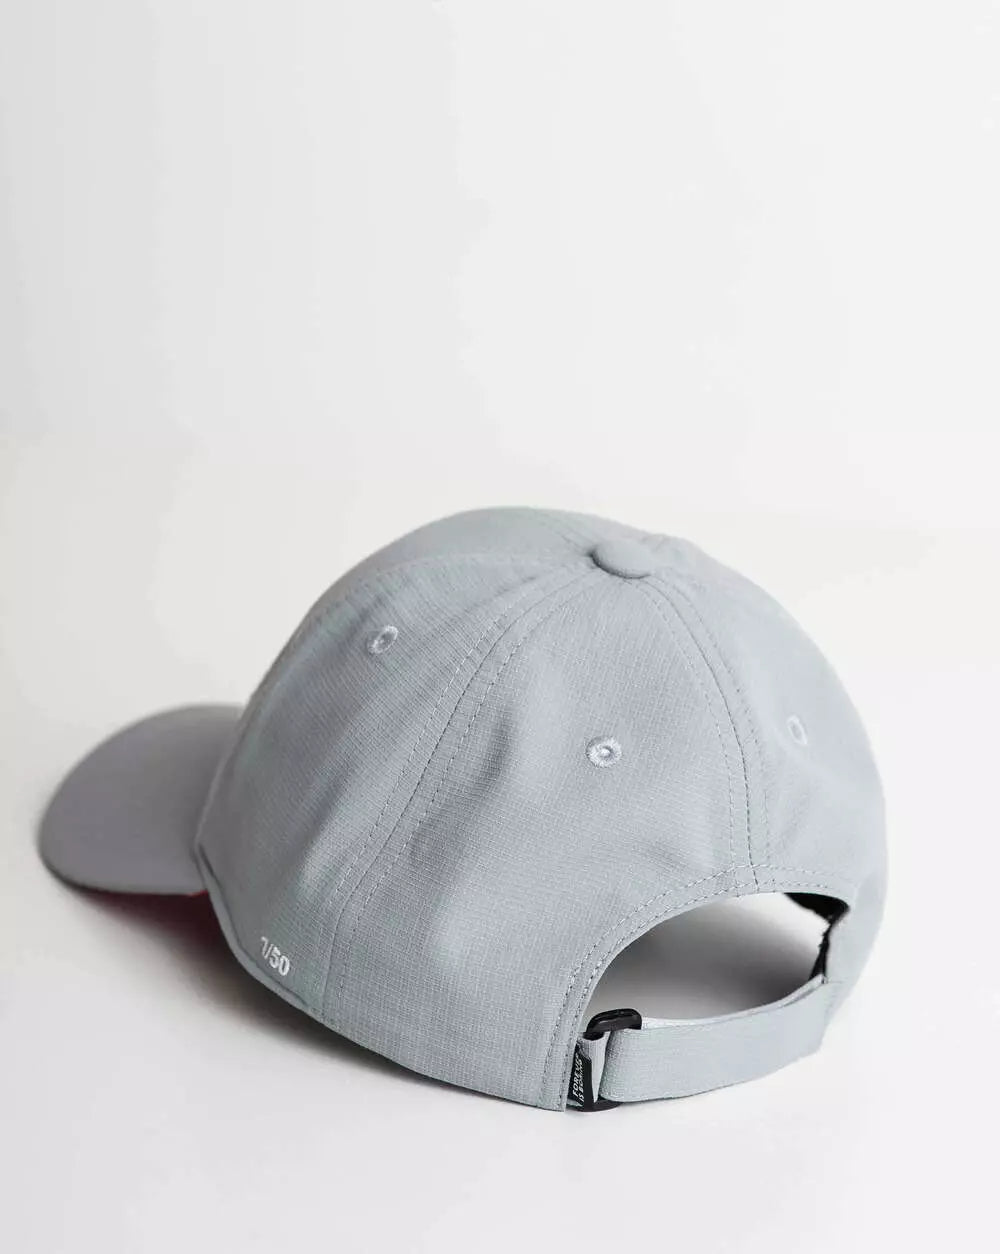 Cap FIB Grey Grid embroidery with the edition number on the side in white.